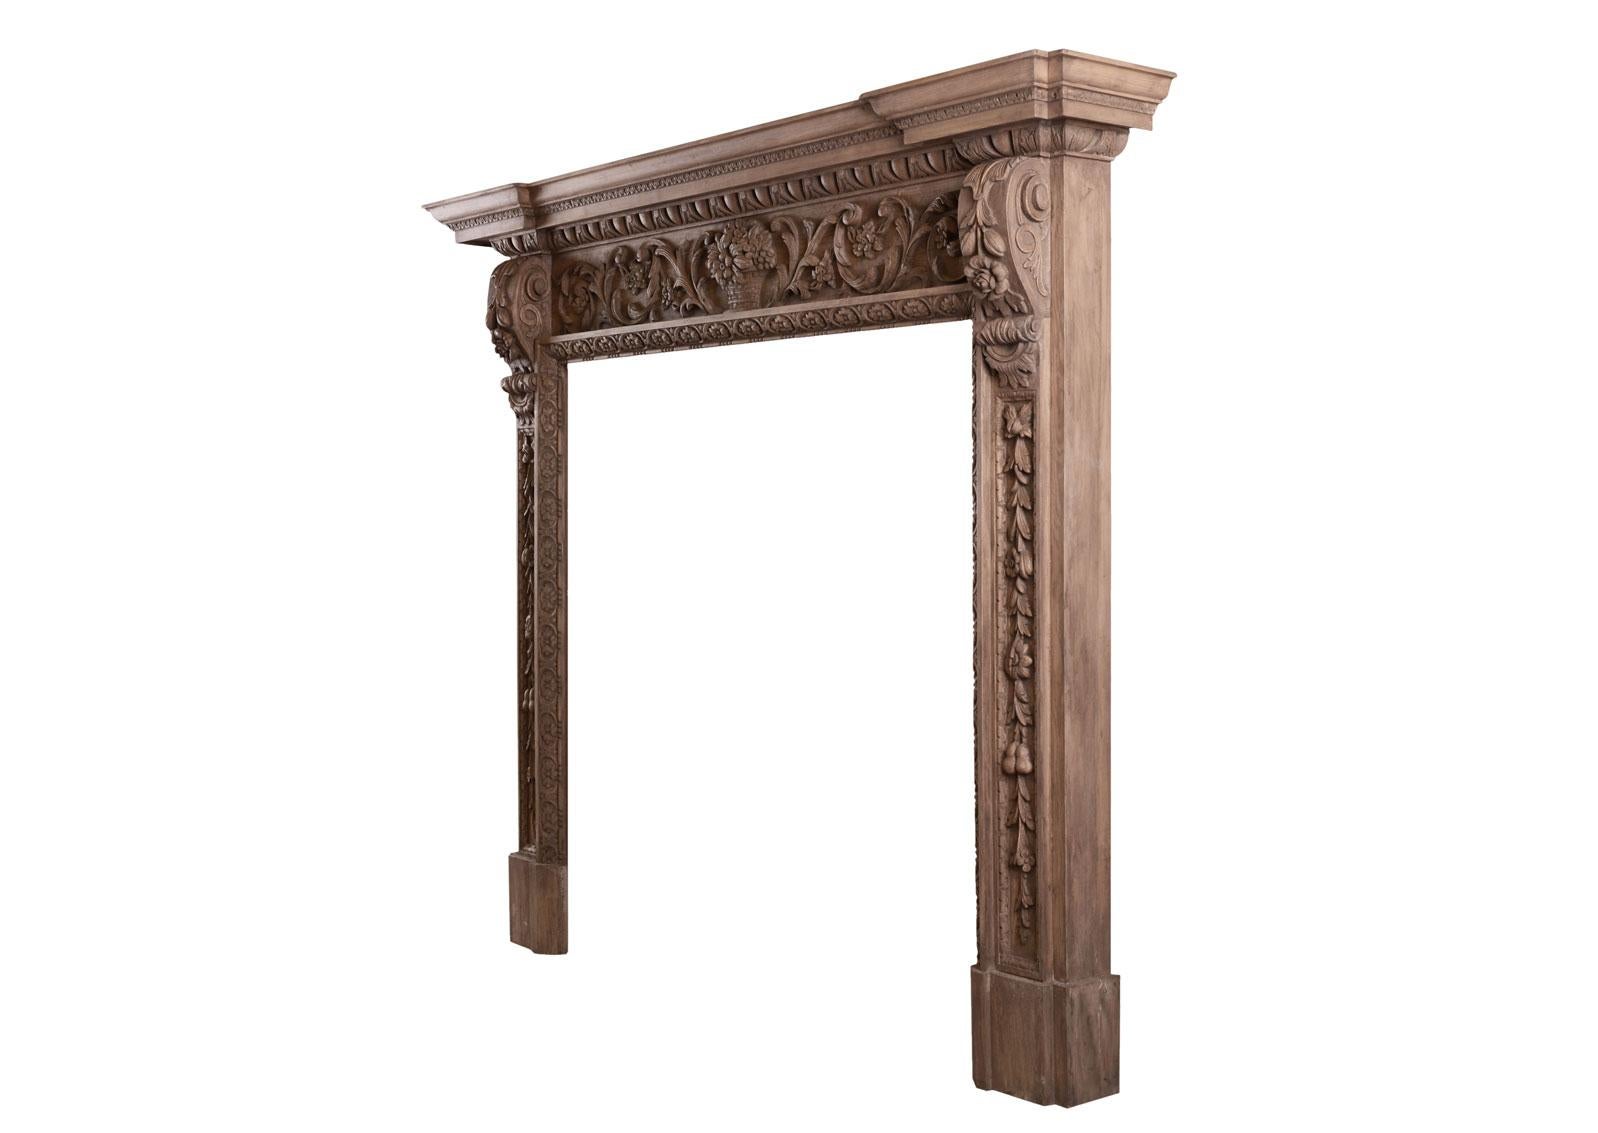 Ornate Pine Fireplace with Carving Throughout In Good Condition For Sale In London, GB